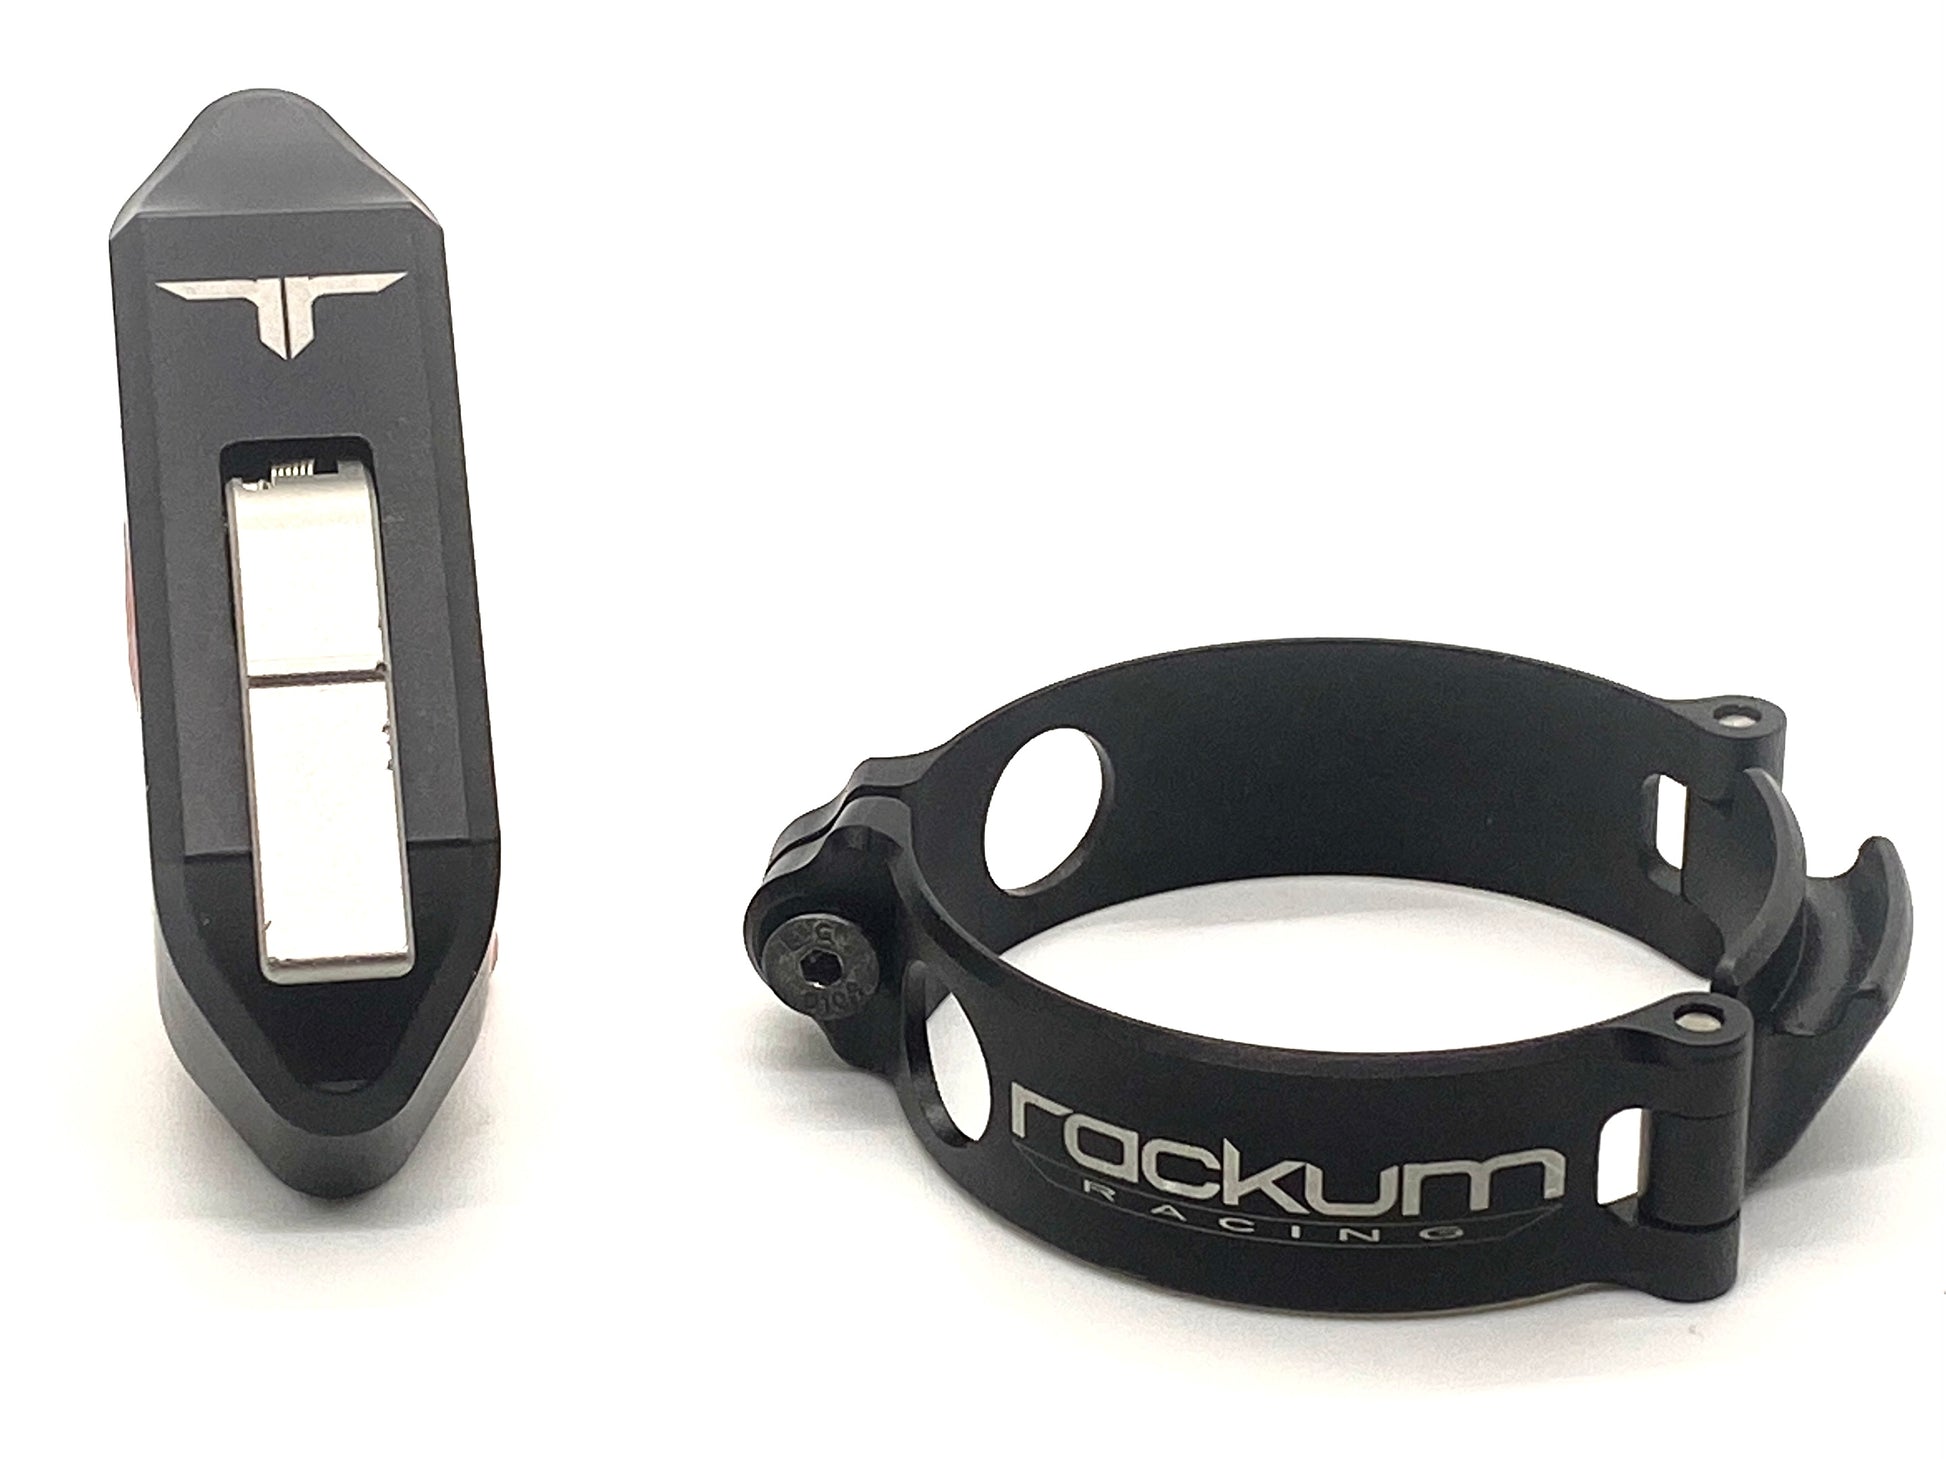 Motocross holeshot device. Rackum Racing ForkLocker is a holeshot device that allowd you to set it yourself. Practicing more with your device allows you to get out in front of your competition.